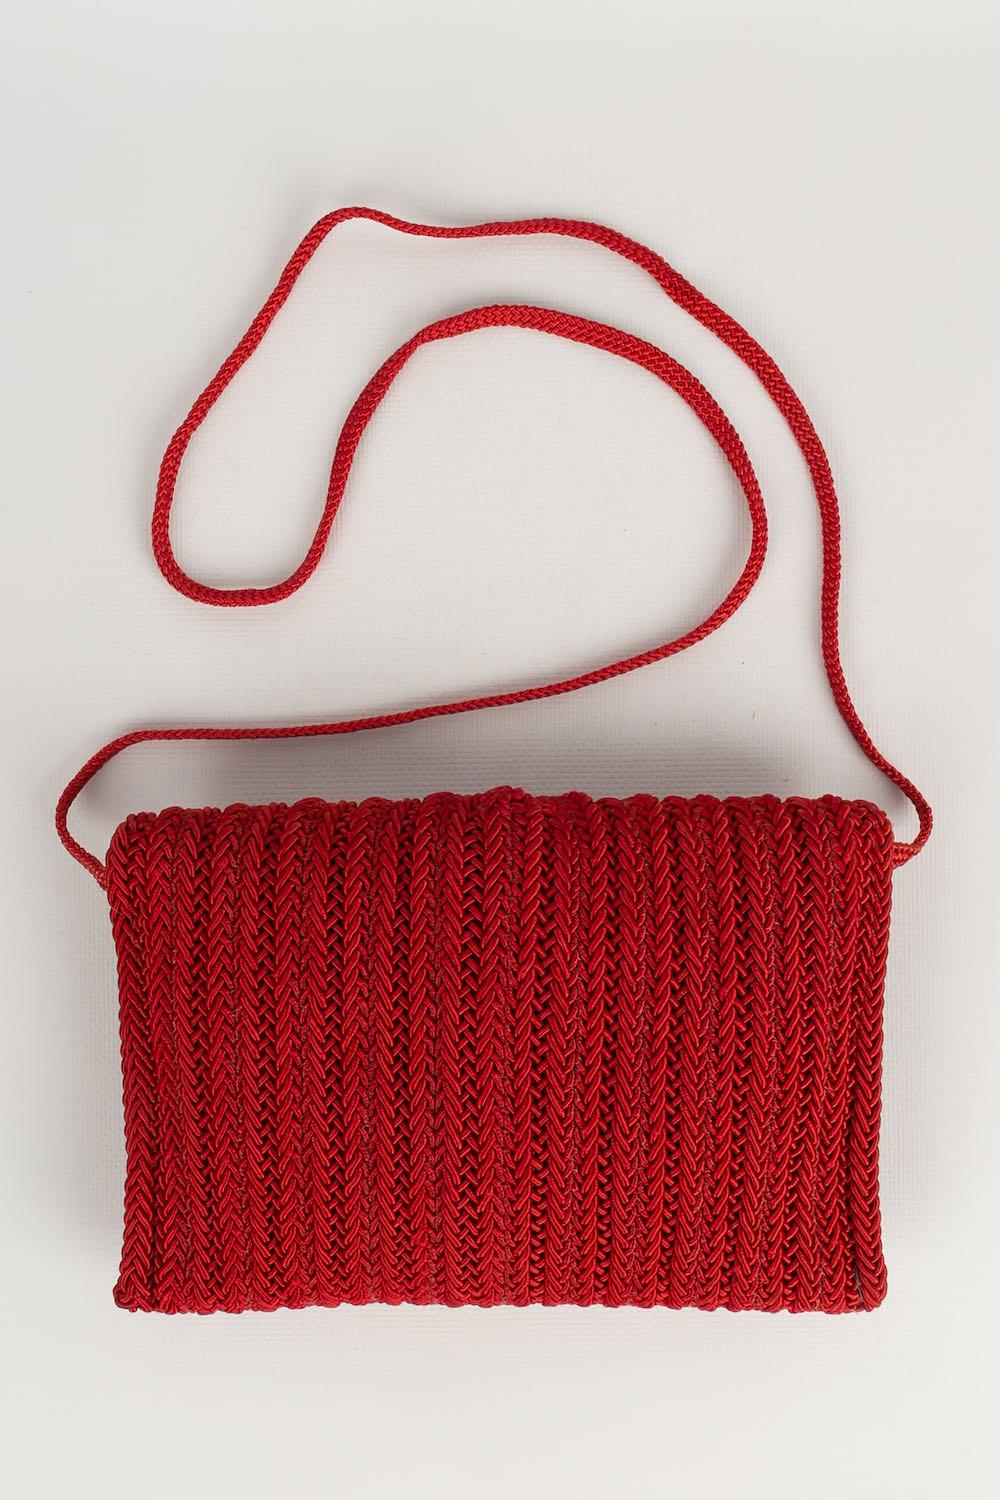 Nina Ricci -(Made in France) Bag in red passementerie and golden metal clasp.

Additional information: 

Dimensions: Height : 22 cm - Width : 15 cm - Handle : 107 cm

Condition: Good condition


Seller Ref number: S87